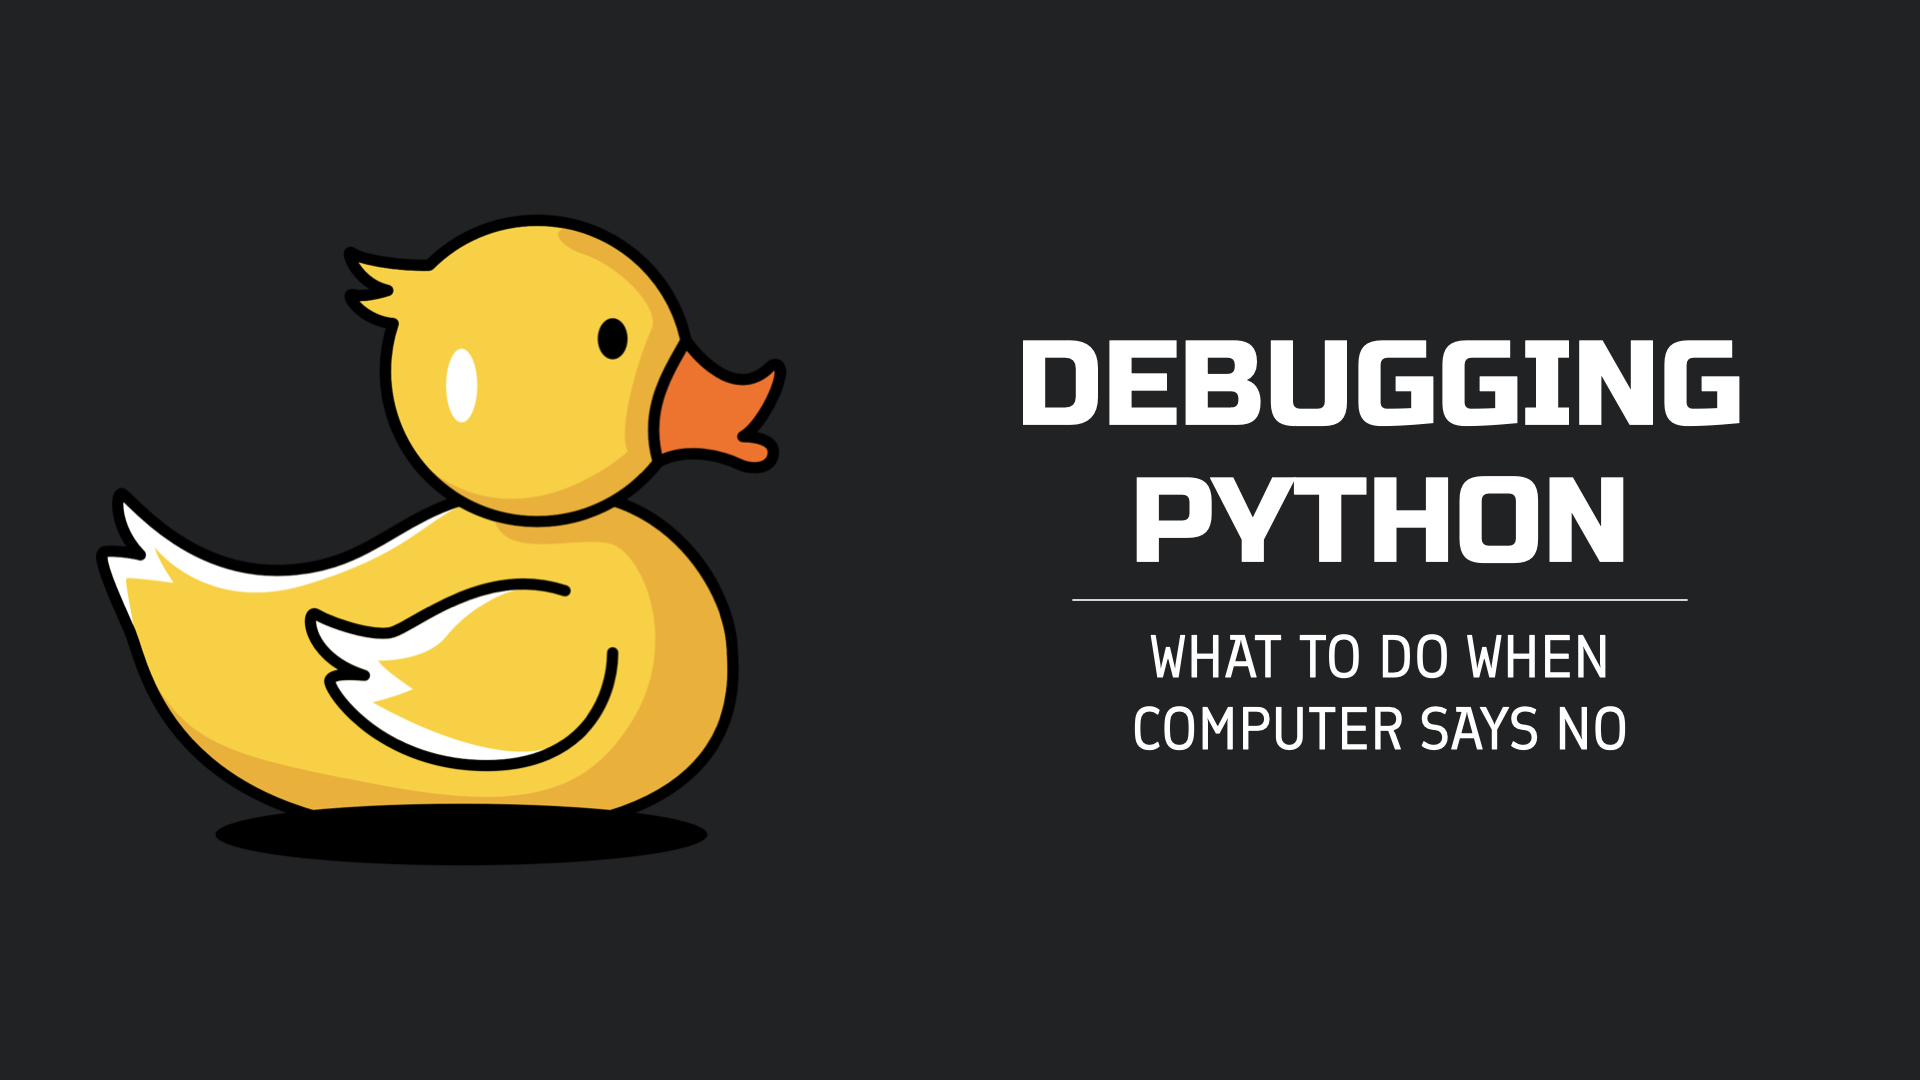 Debugging Python - What to do when computer says no